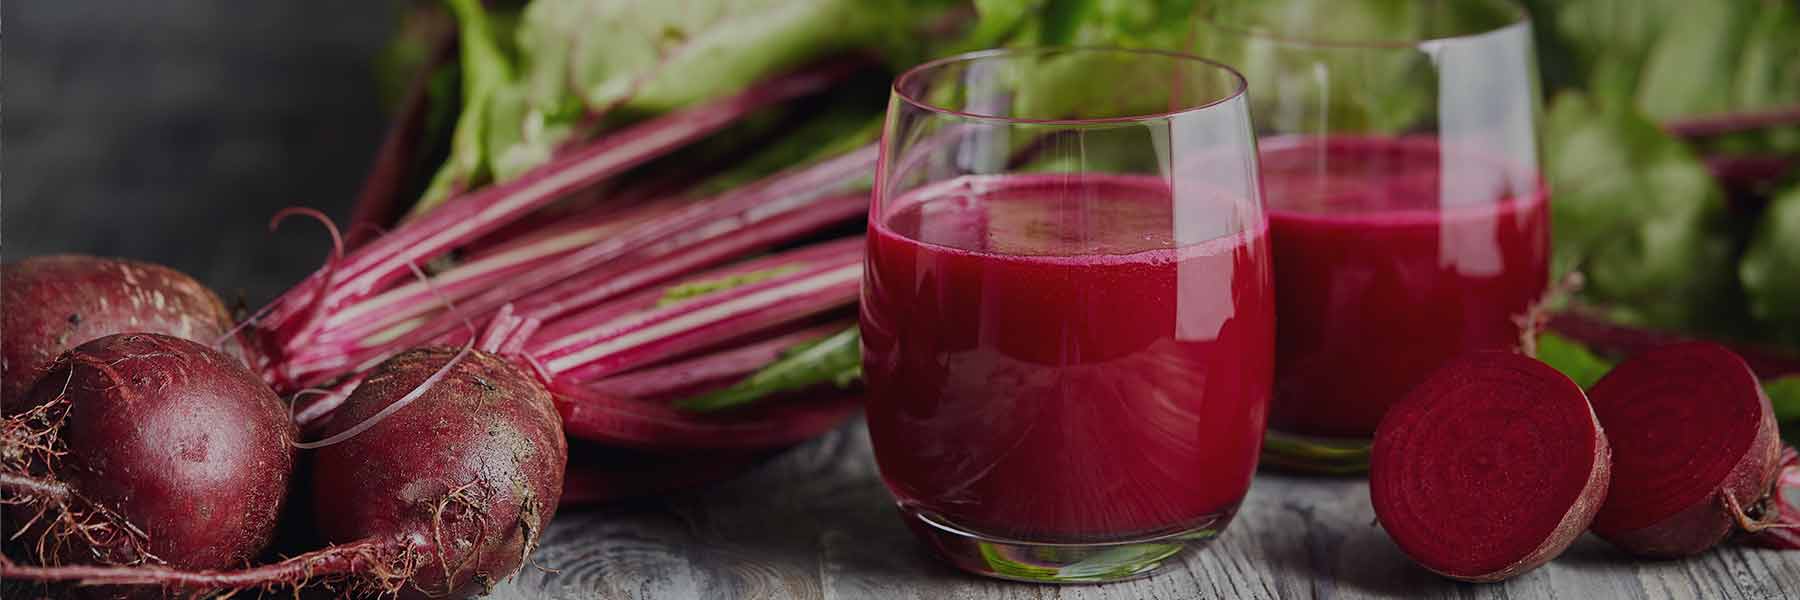 Beetroot - Nutracelle